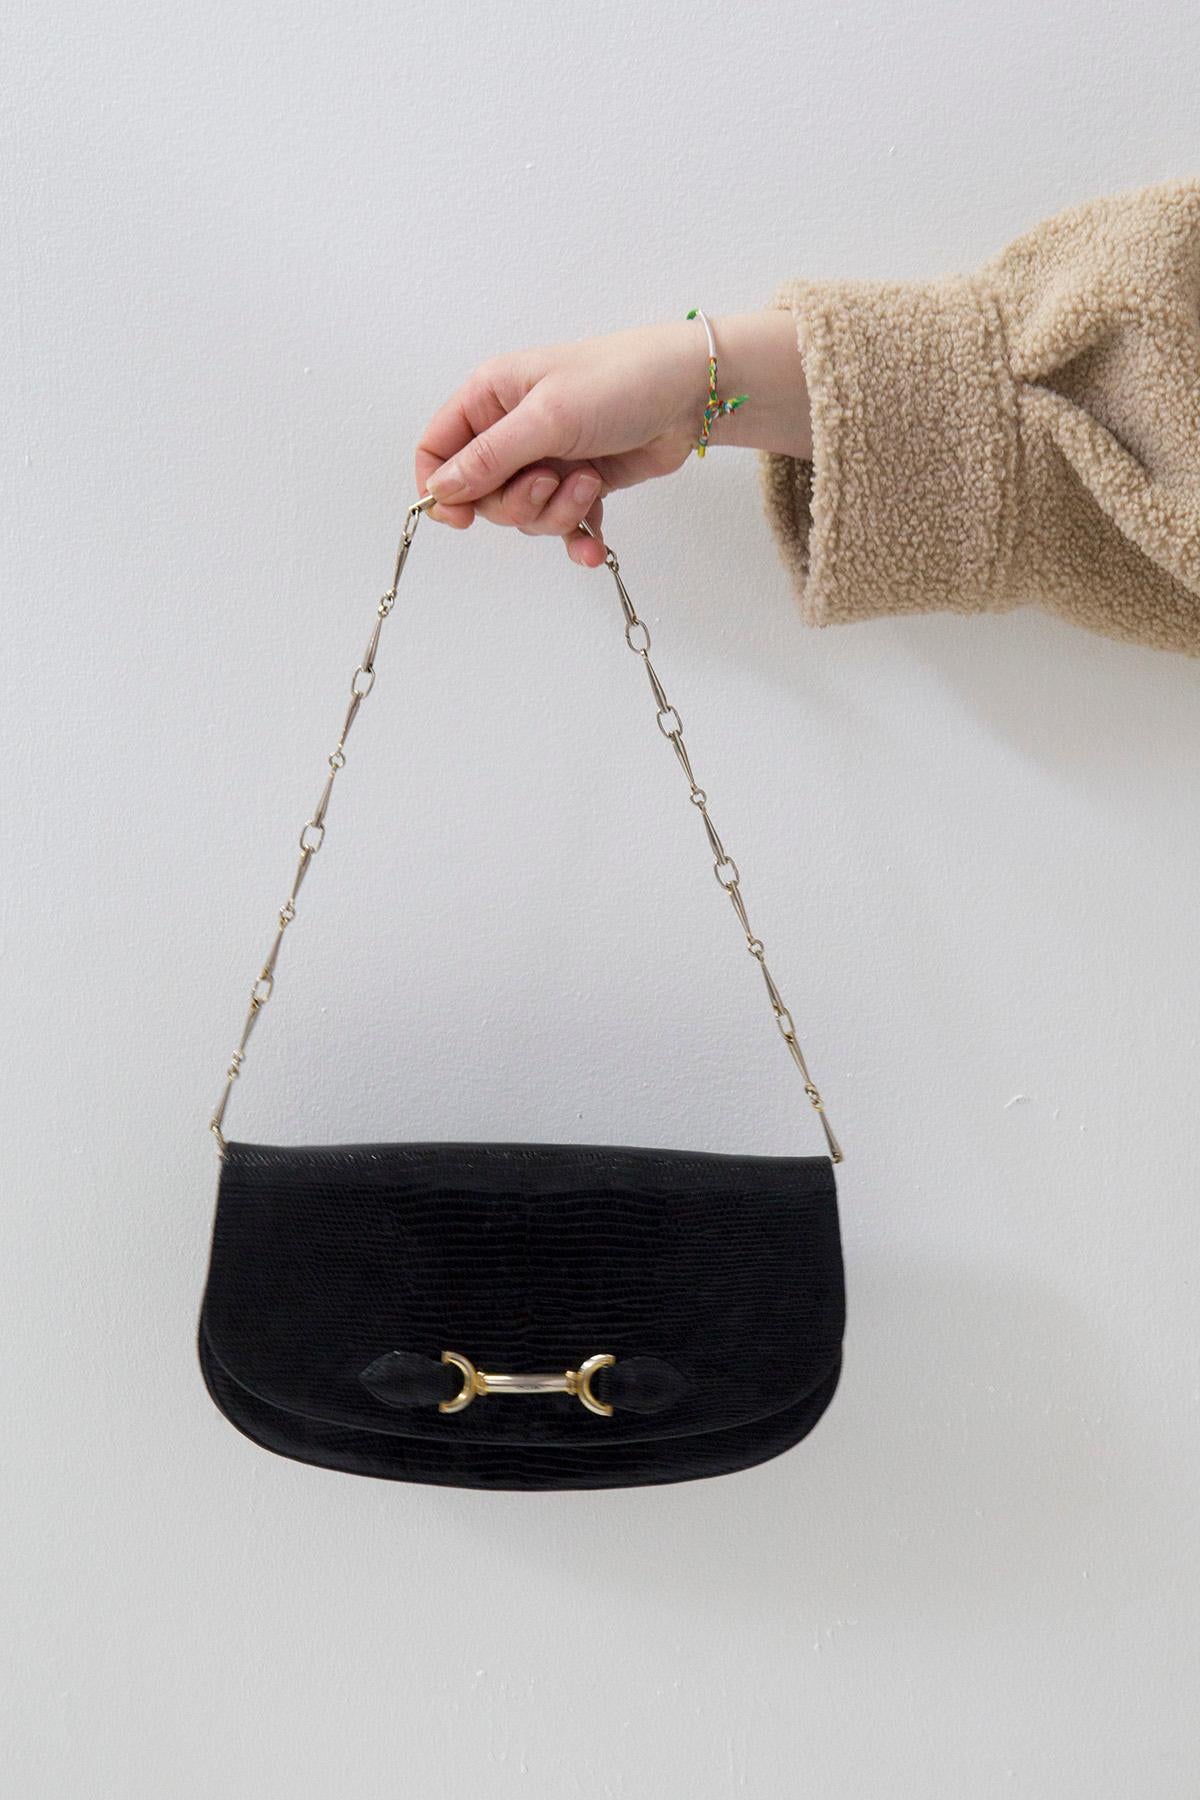 Vintage Bag in Black Leather and Gold Metal For Sale 4